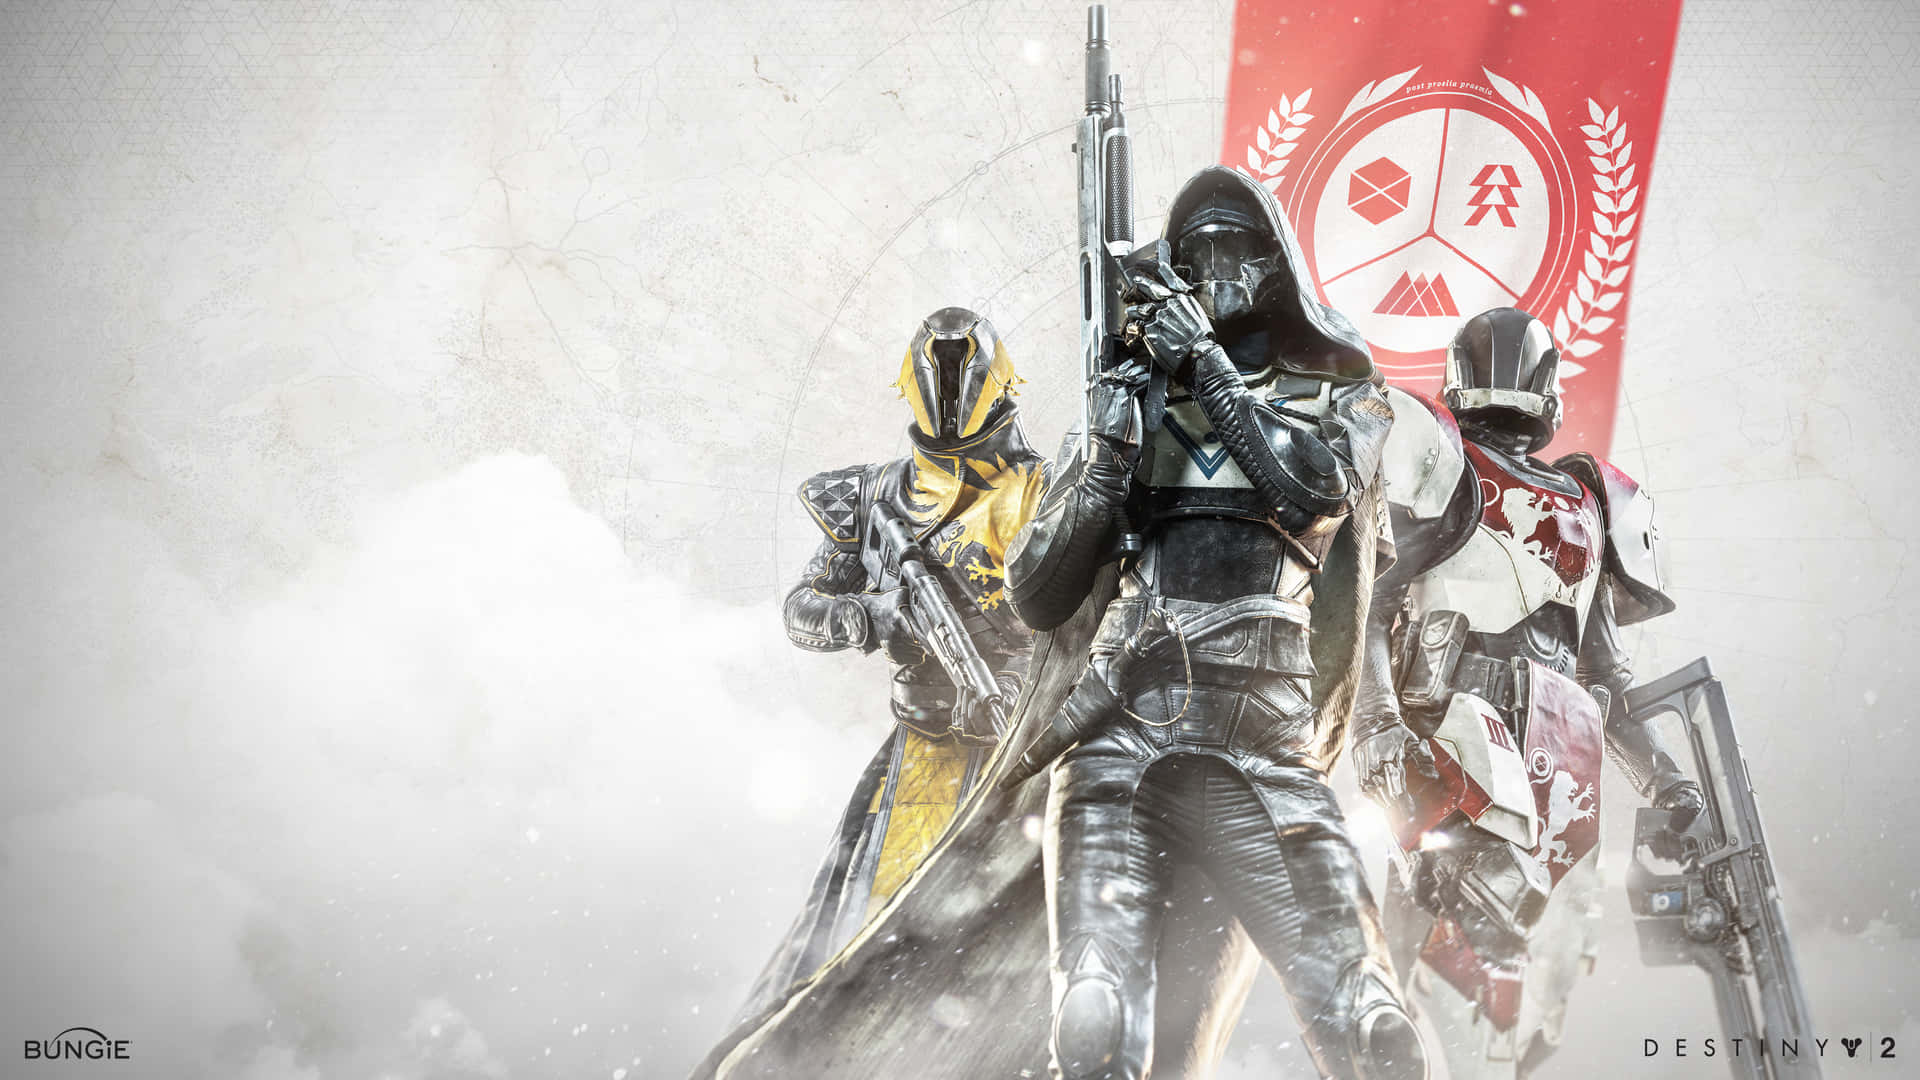 Look out and take control - be the Hunter in Destiny 2 Wallpaper